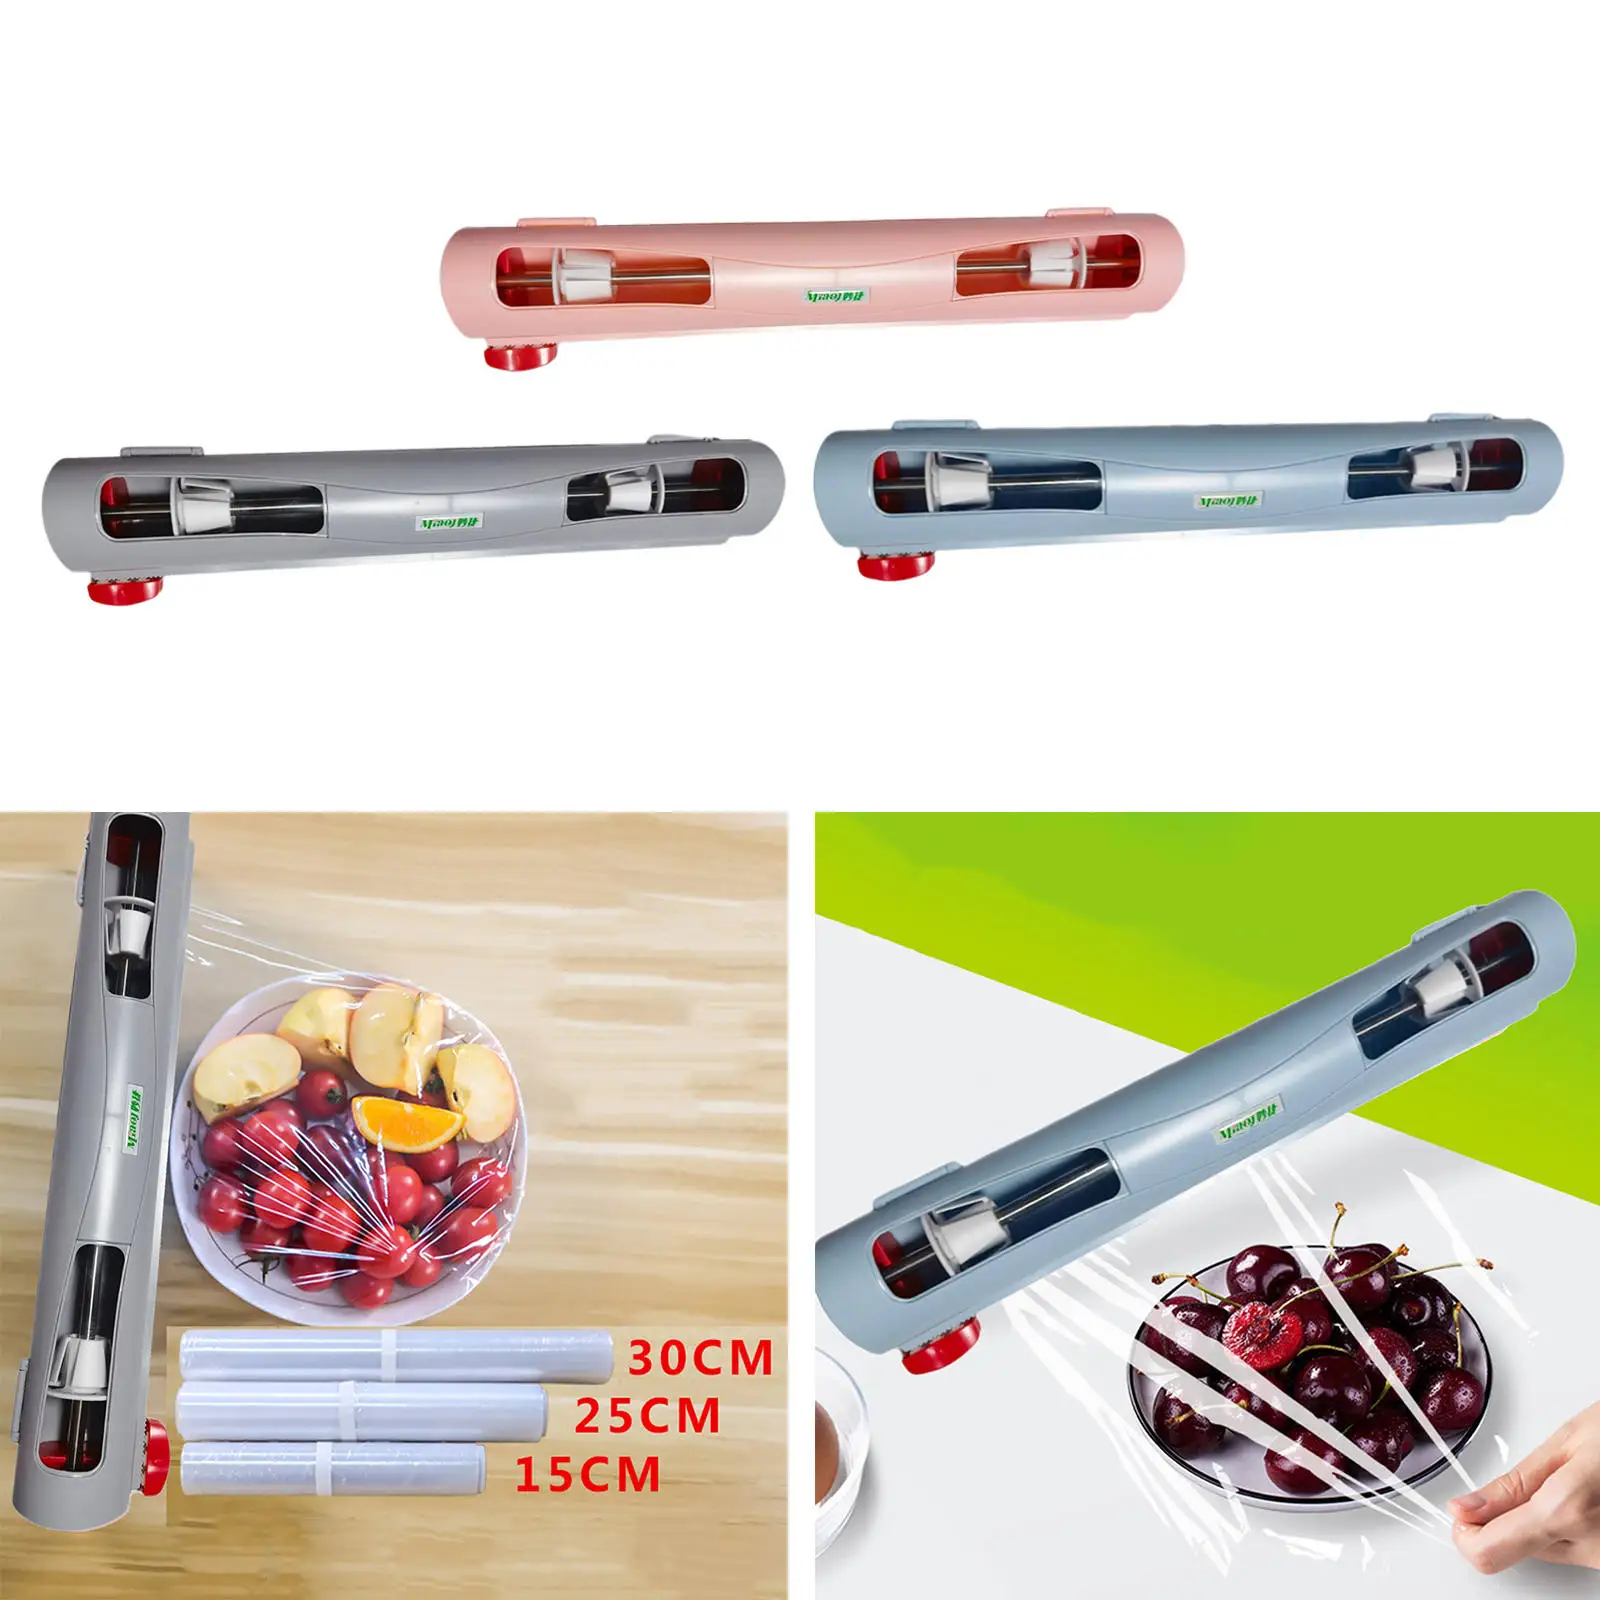 Refillable Plastic Wrap Foil Dispenser with Slide Cutter Magnetic Cling Film Cutter Storage Holder Cookware Tool Home Supplies